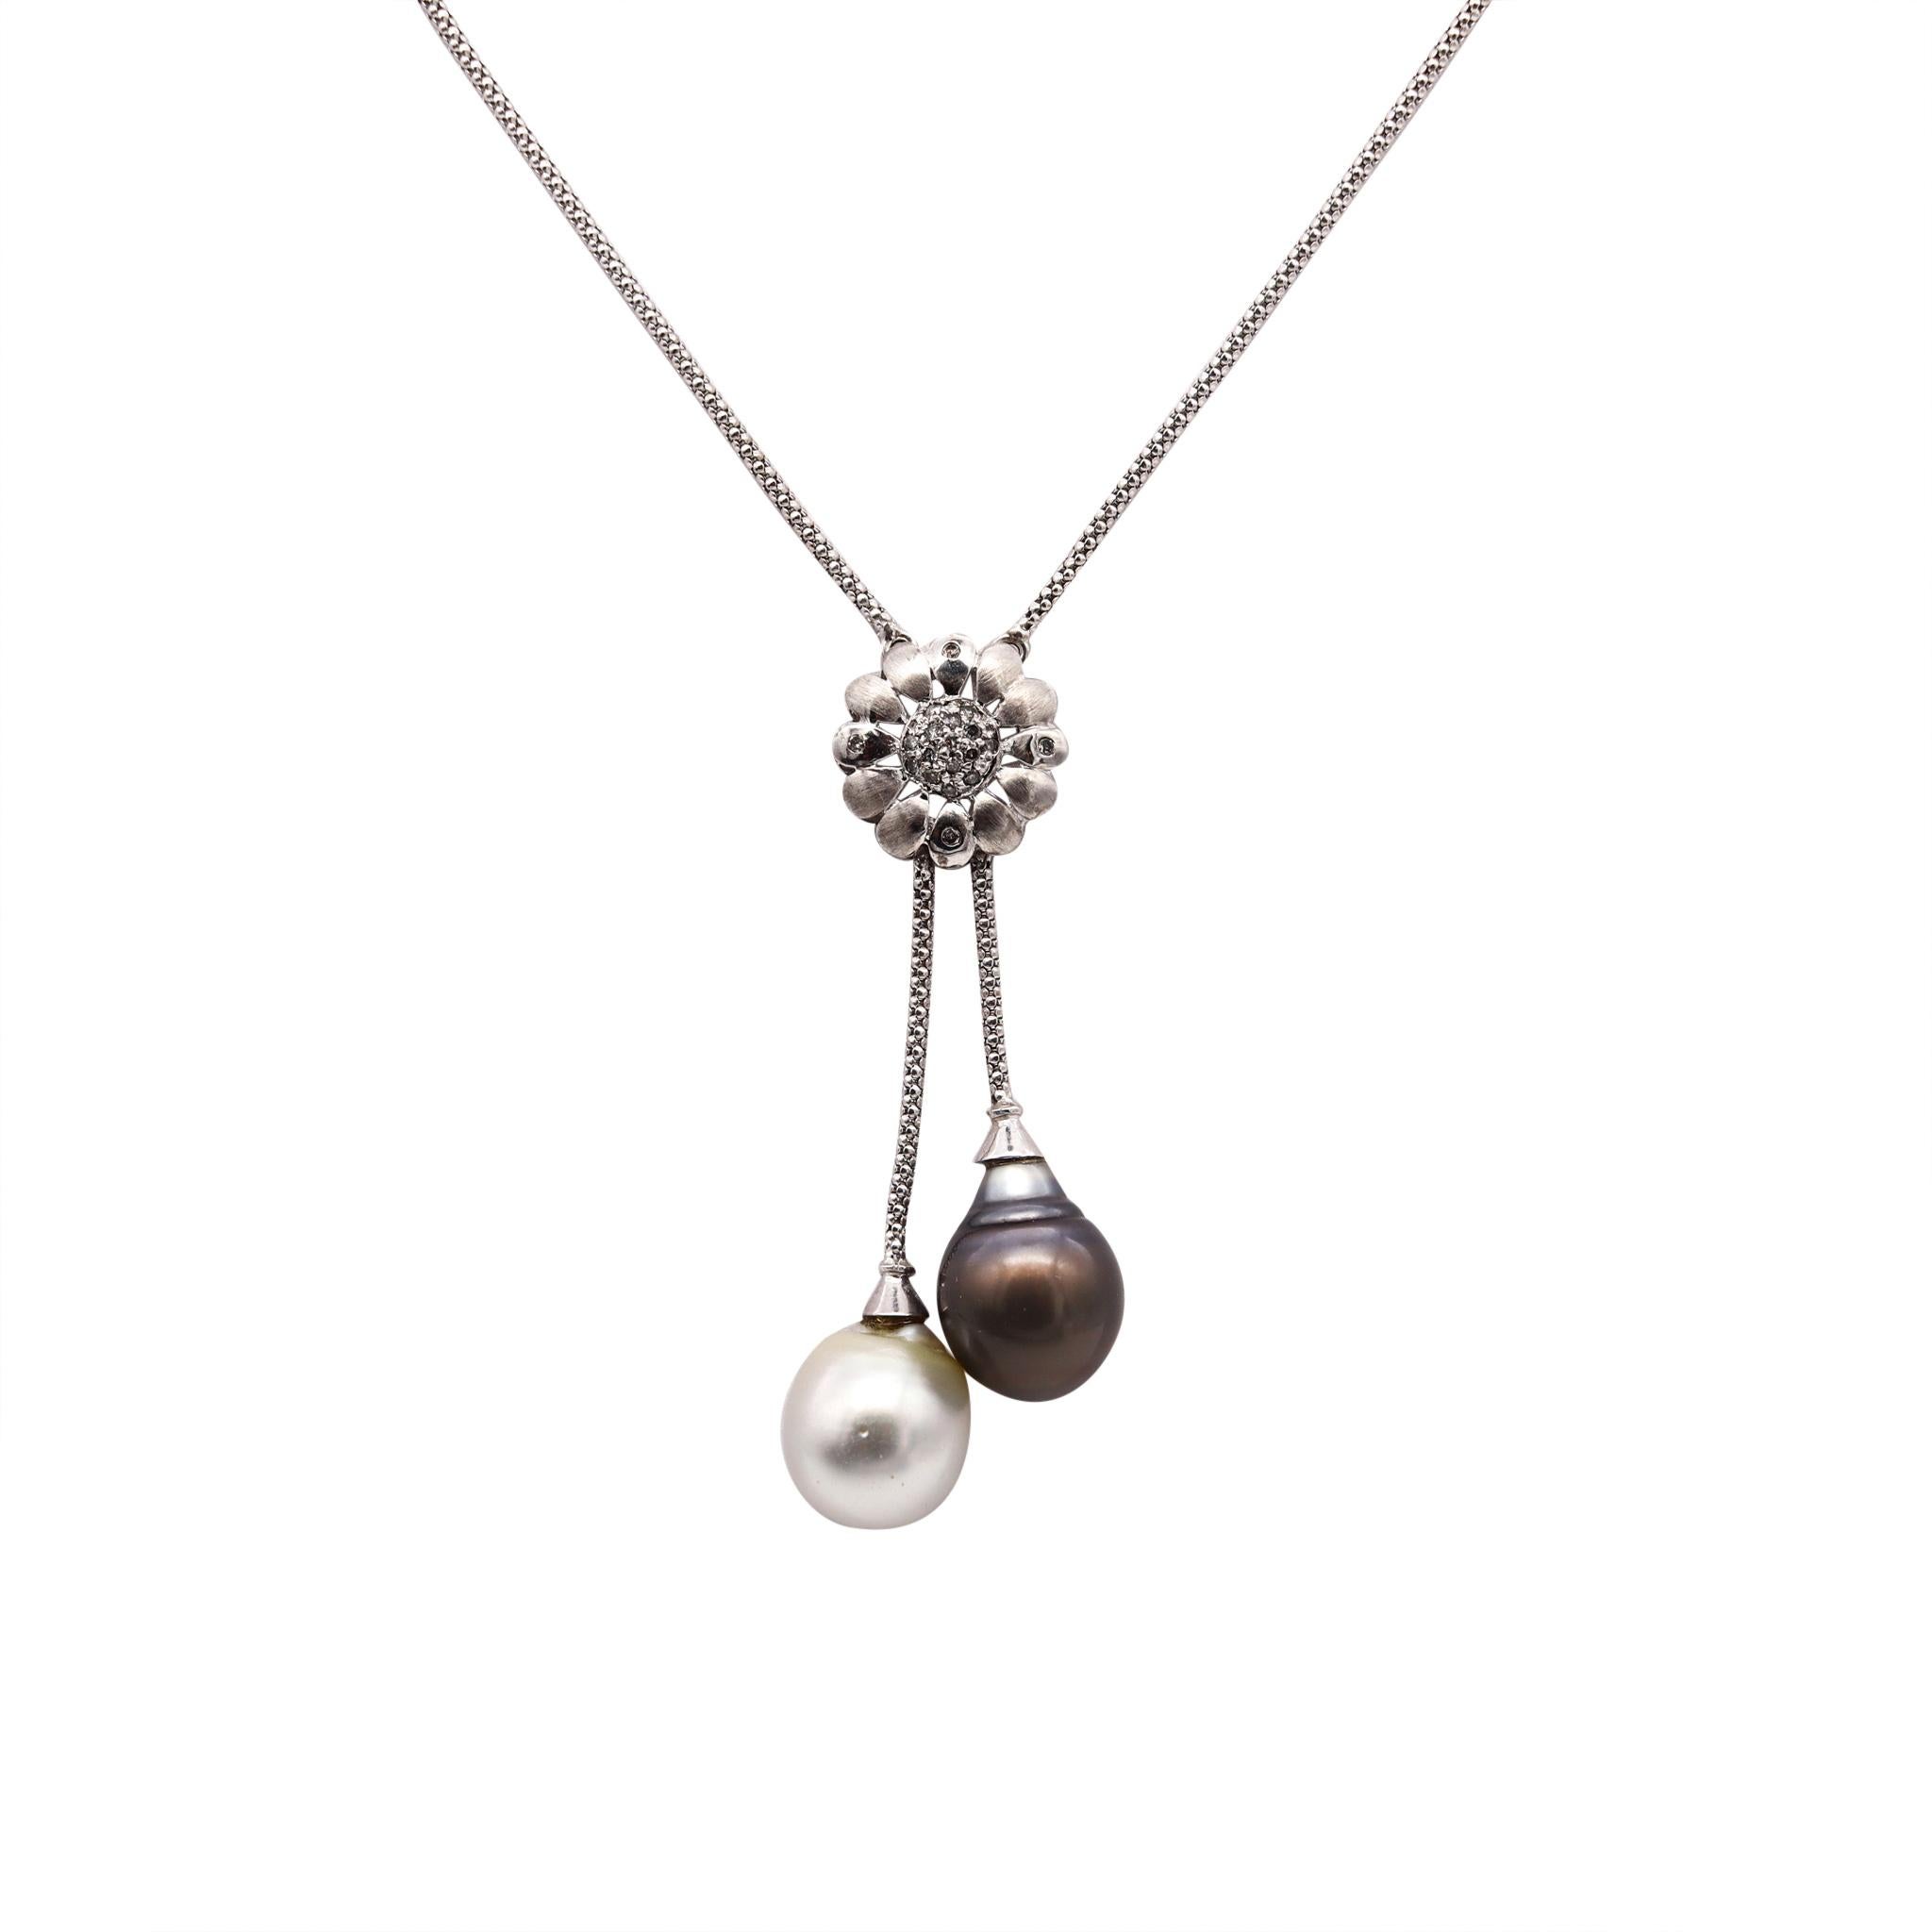 Italian necklace designed by UnoAerre.

Beautiful piece, crafted in Italy in solid white gold of 14 karats. This lariat necklace is mounted with a pair of very fine South Sea pearls; a gray-black of 14.5 mm and a white of 14 mm.

The rosette in the